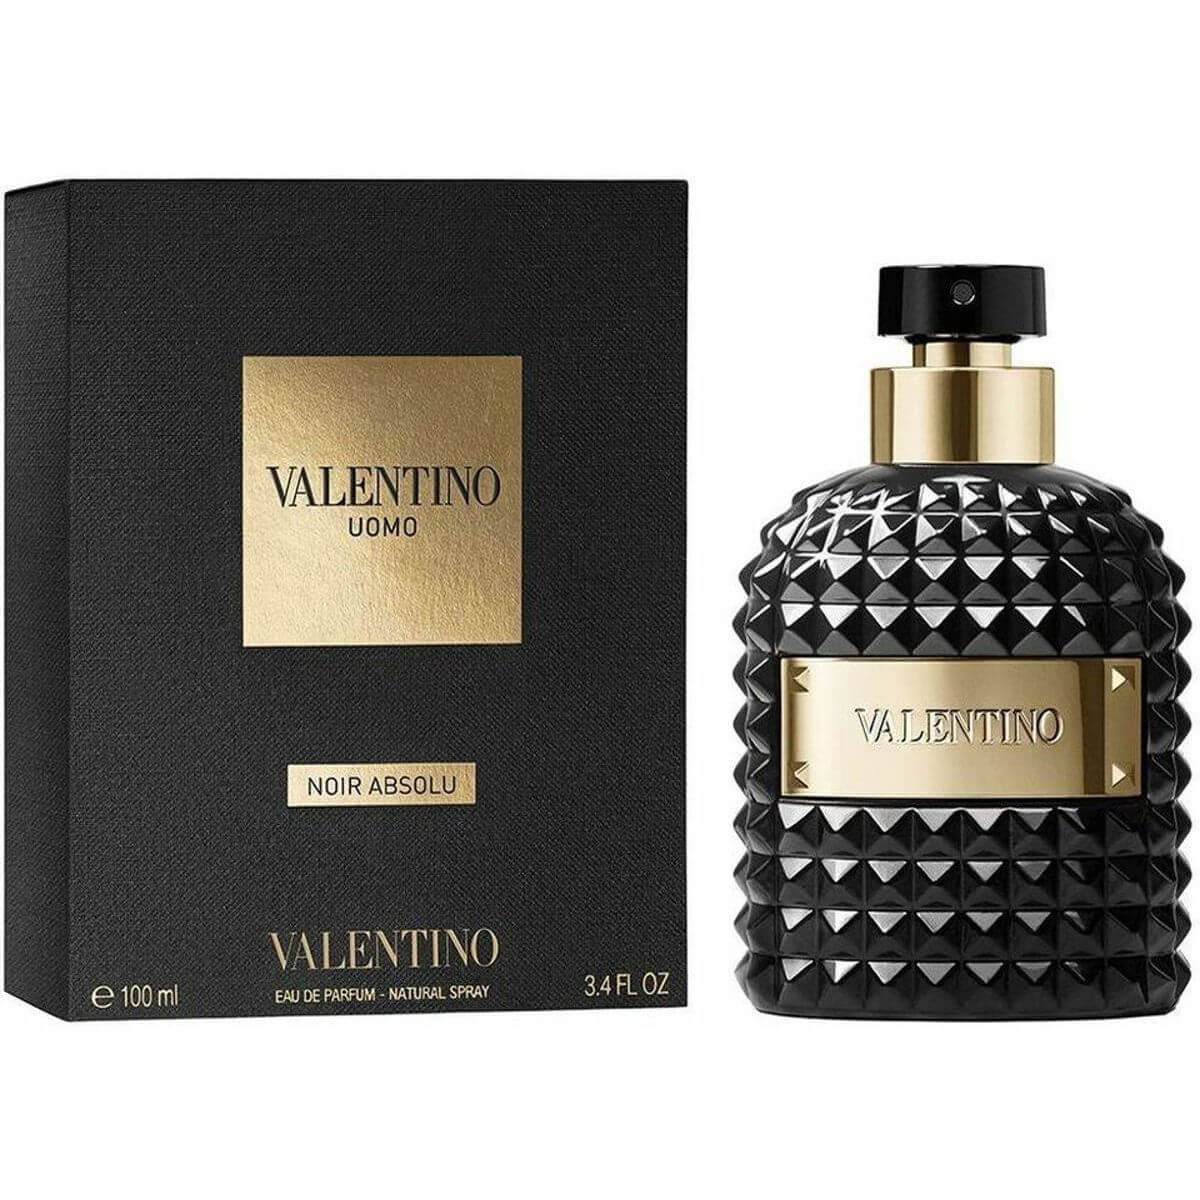 Valentino – Uomo Noir Absolu, a woody fragrance for men. An oriental essence that embodies the Italian elegance and classiness. A contemporary and mysterious blend that opens with dark notes of black pepper, followed by a potent and precious heart of incense oil. The smoky and deep perfume ends with a base of sandalwood. Uomo Noir Absolu, a unique fragrance. Top Notes: Black pepper, cinnamonHeart Notes: Incense oil, resinoidBase Notes: Sandalwood